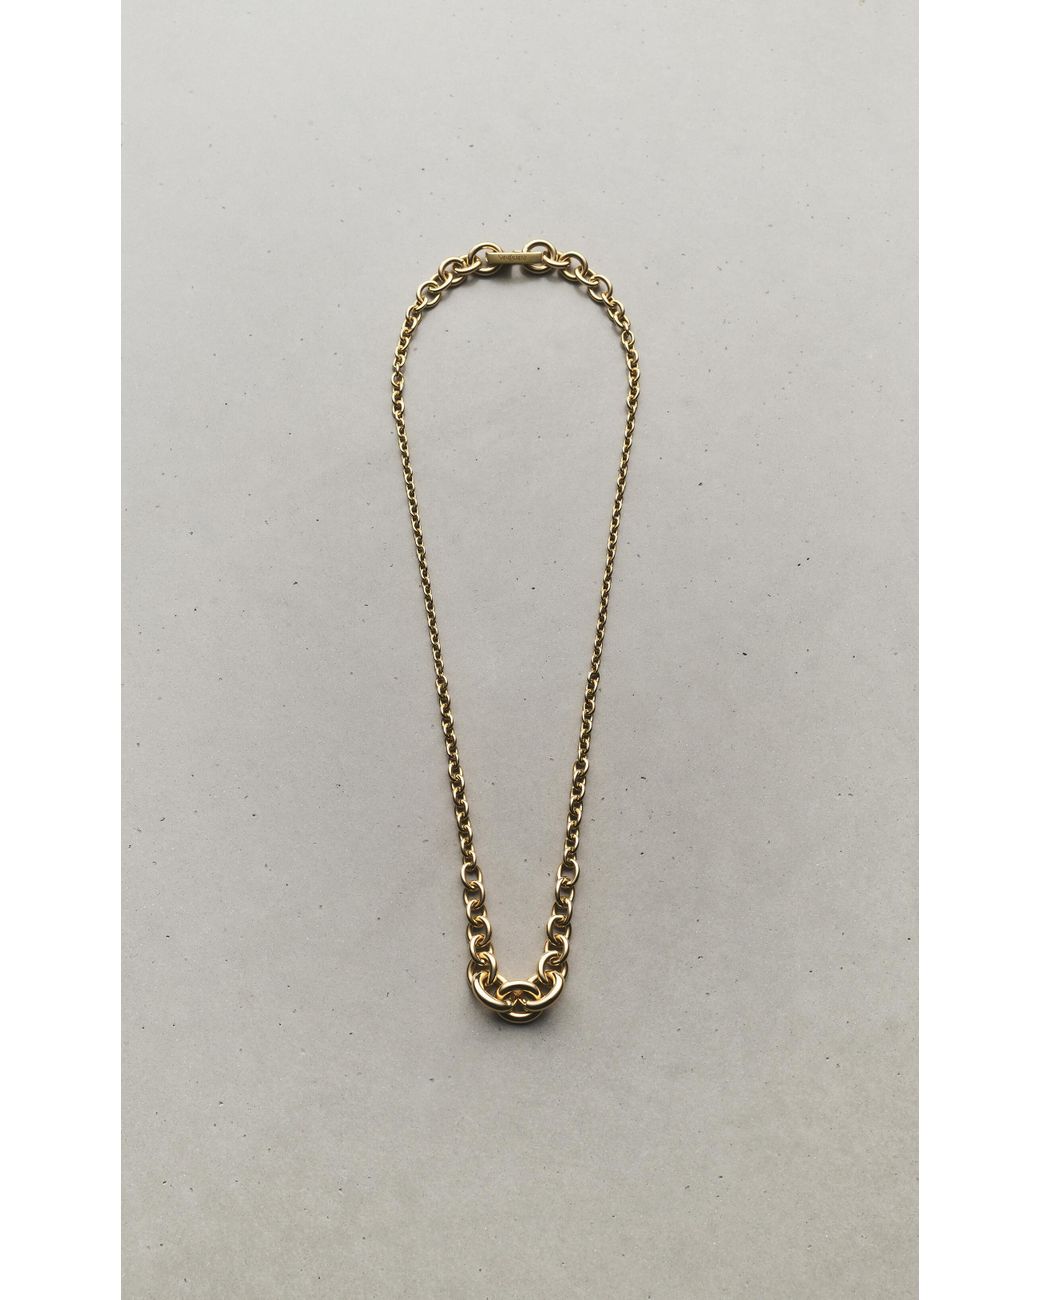 Saint Laurent Graduated Chain Necklace In 18k Yellow Gold in White | Lyst